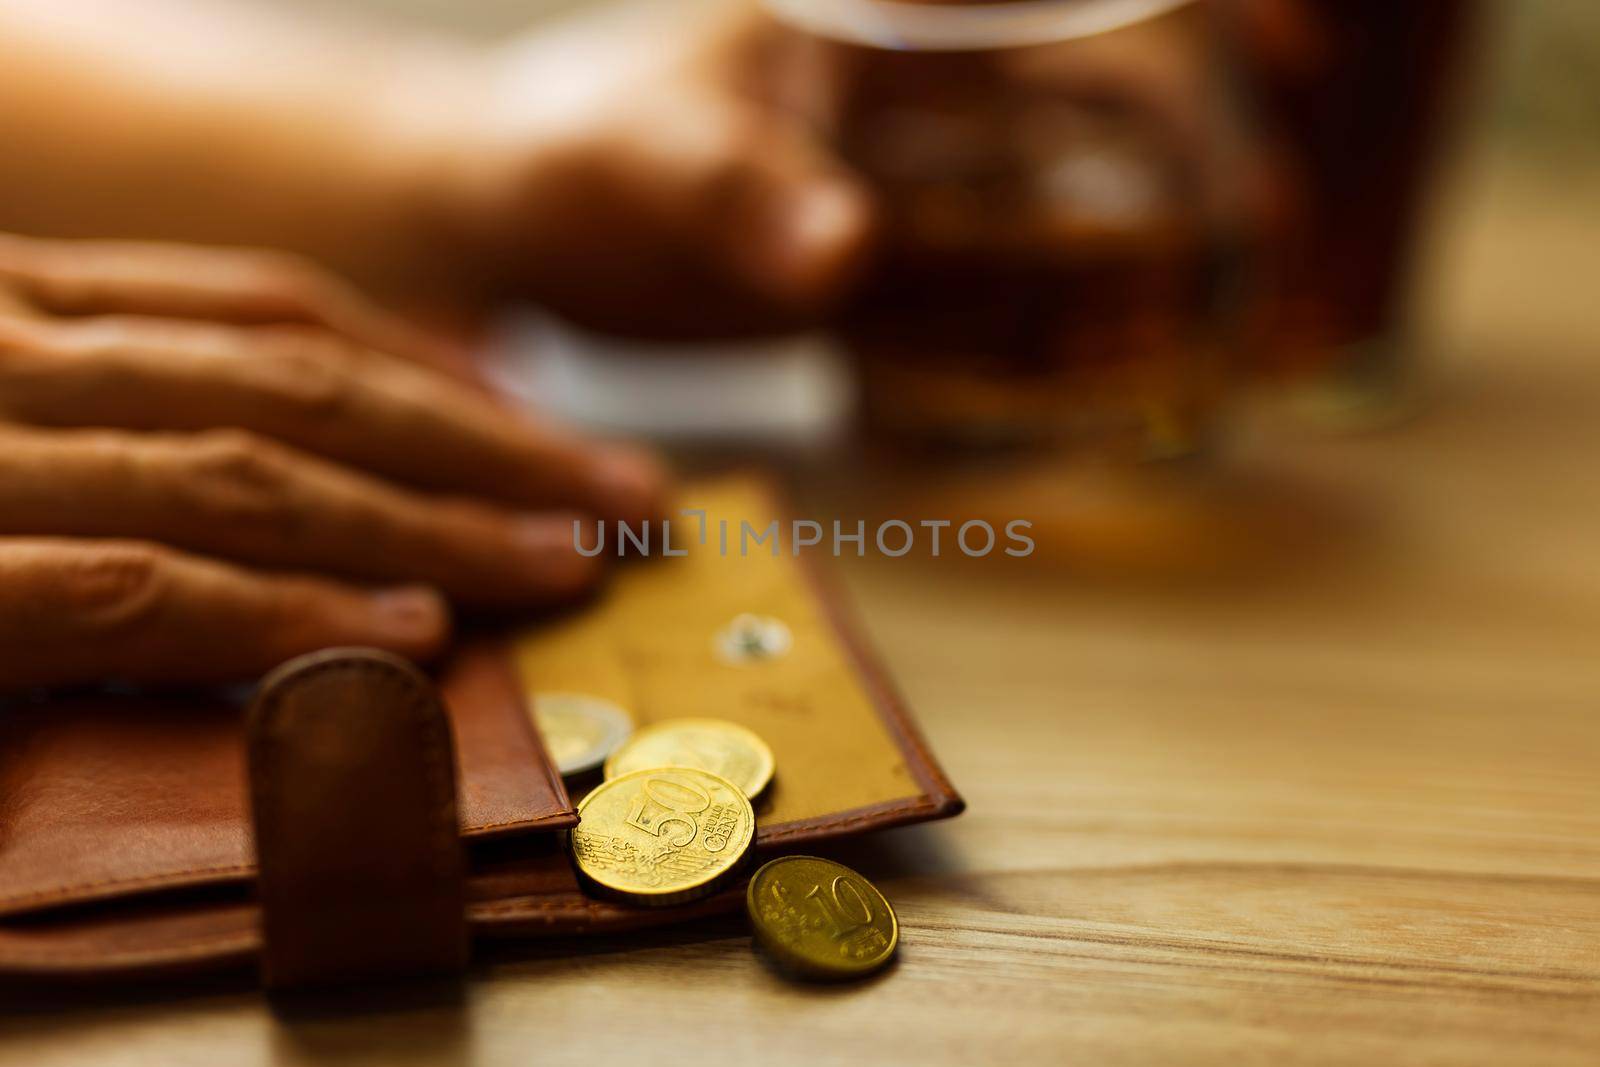 Fired man countsing his last money to drink expensive alcohol. by InnaVlasova